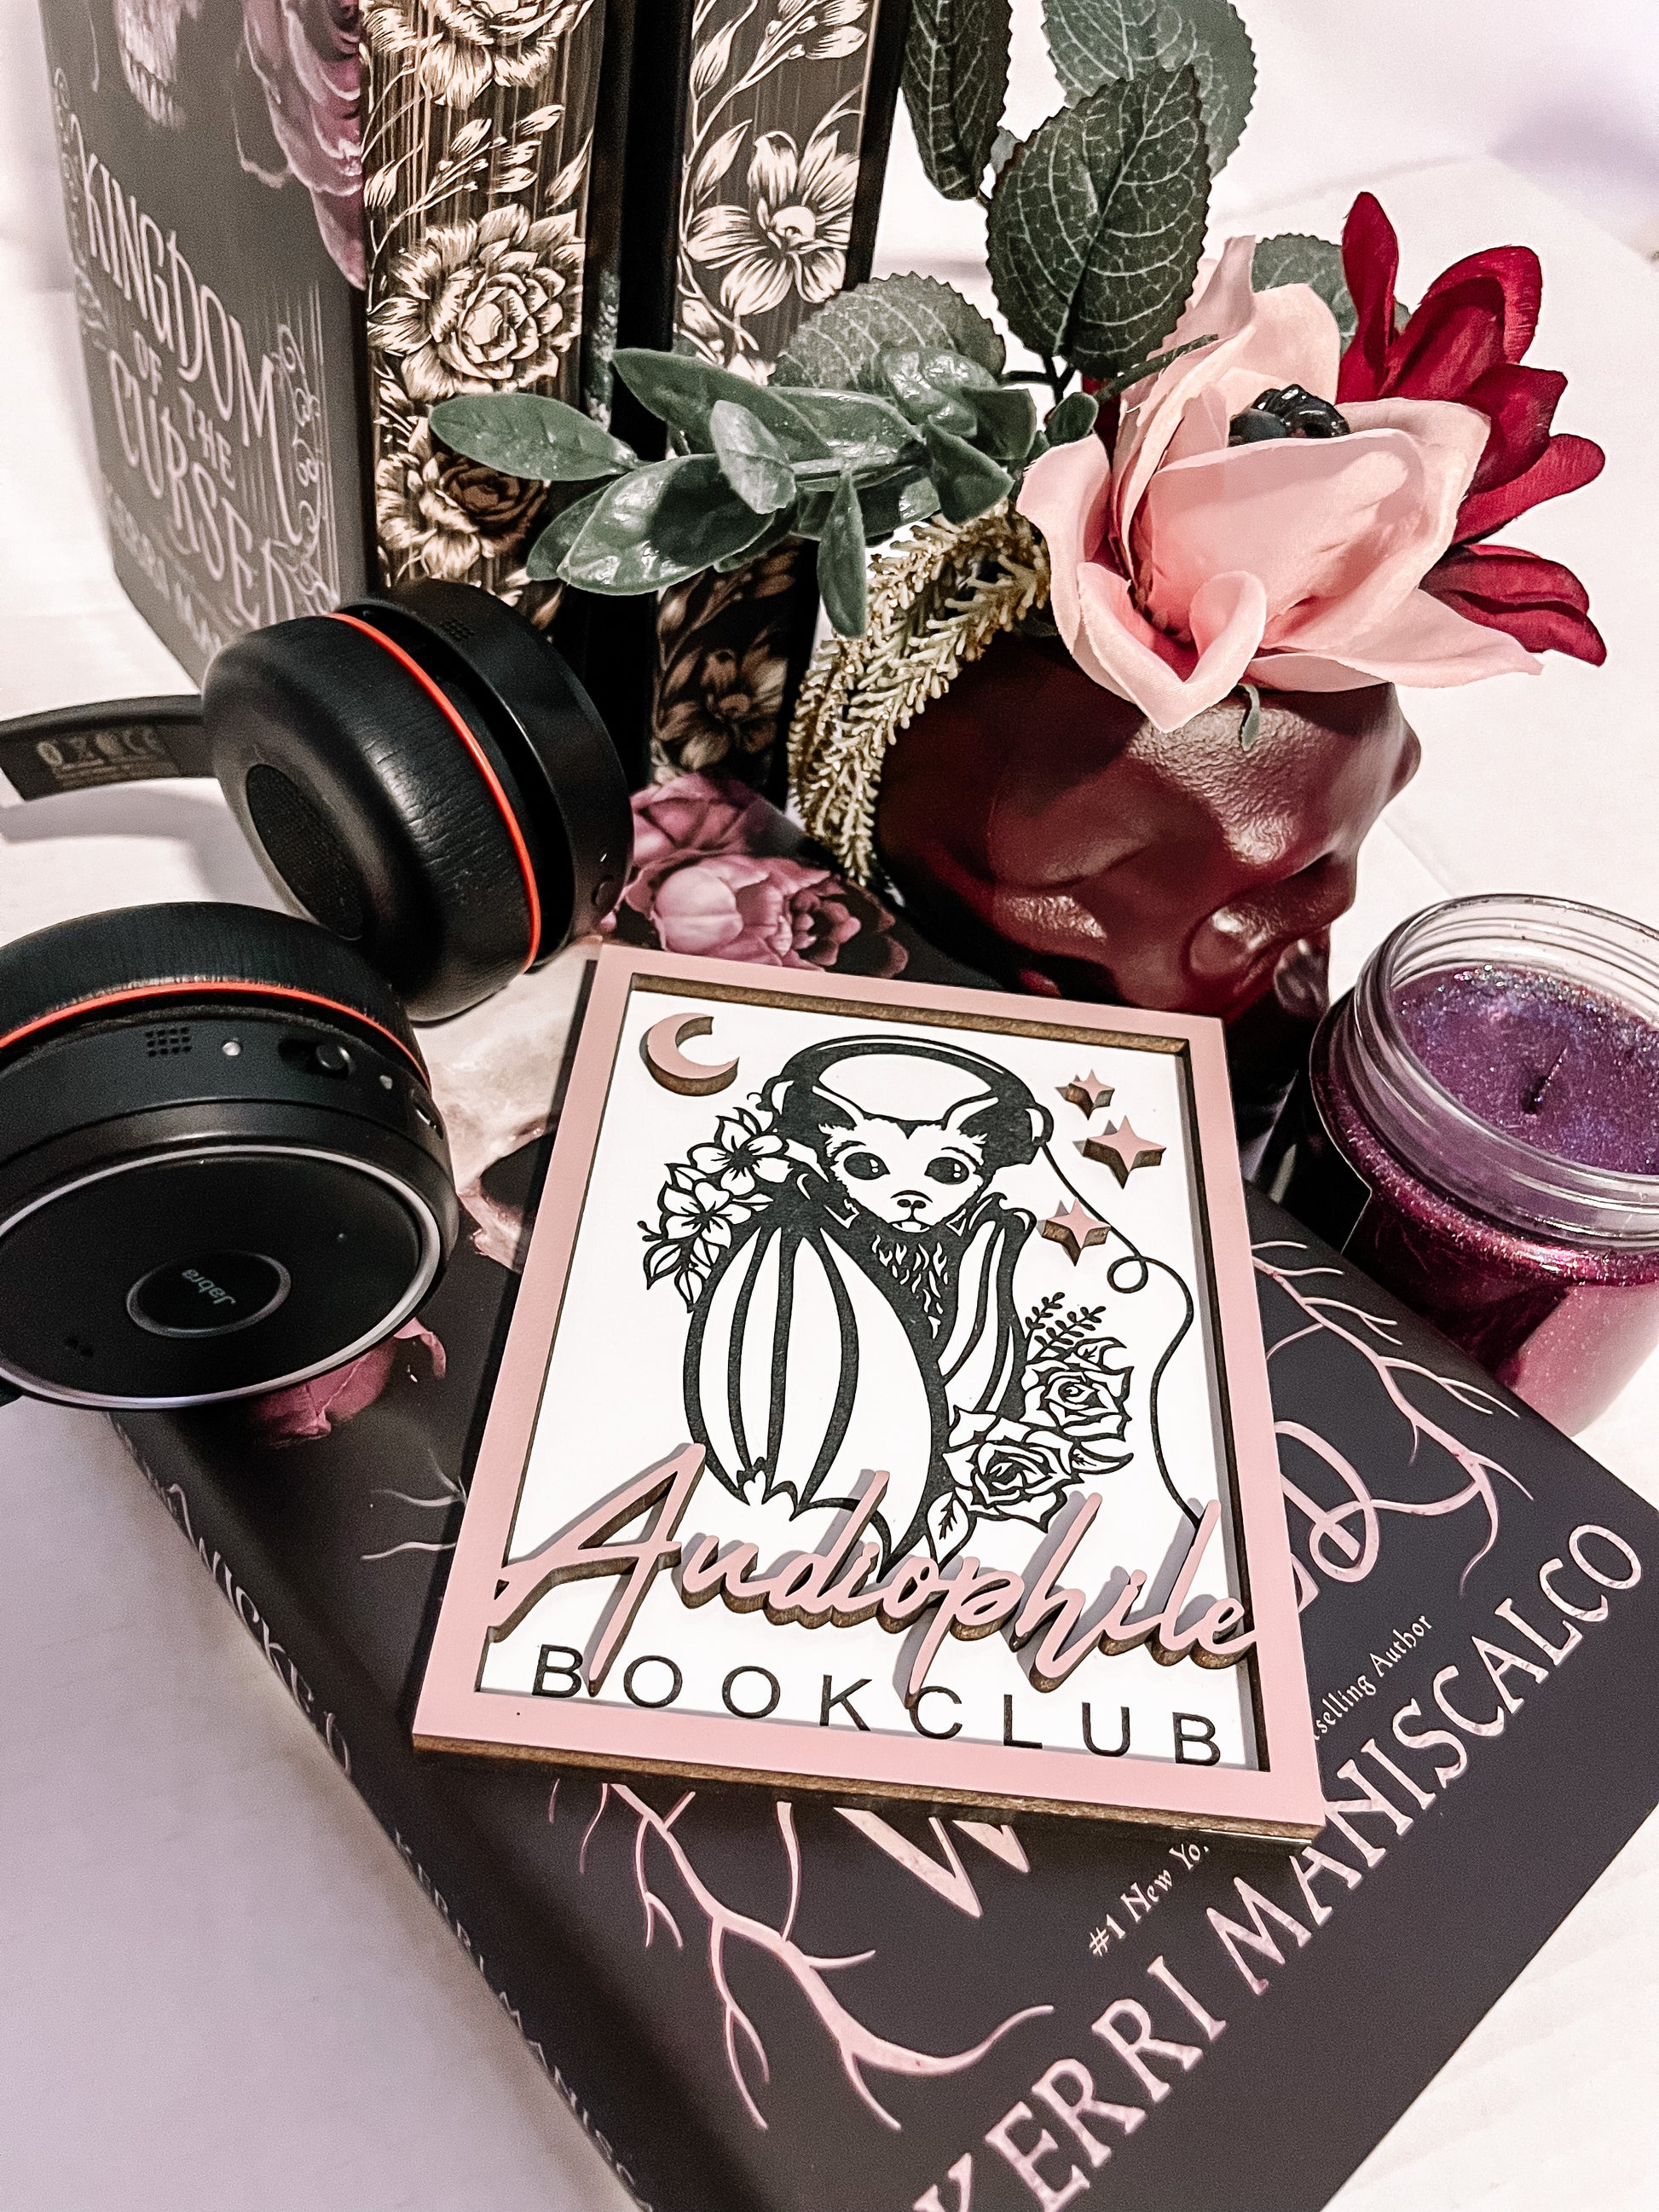 Audiophile Book Club Sign - firedrakeartistry Photo by @jessielovenelit